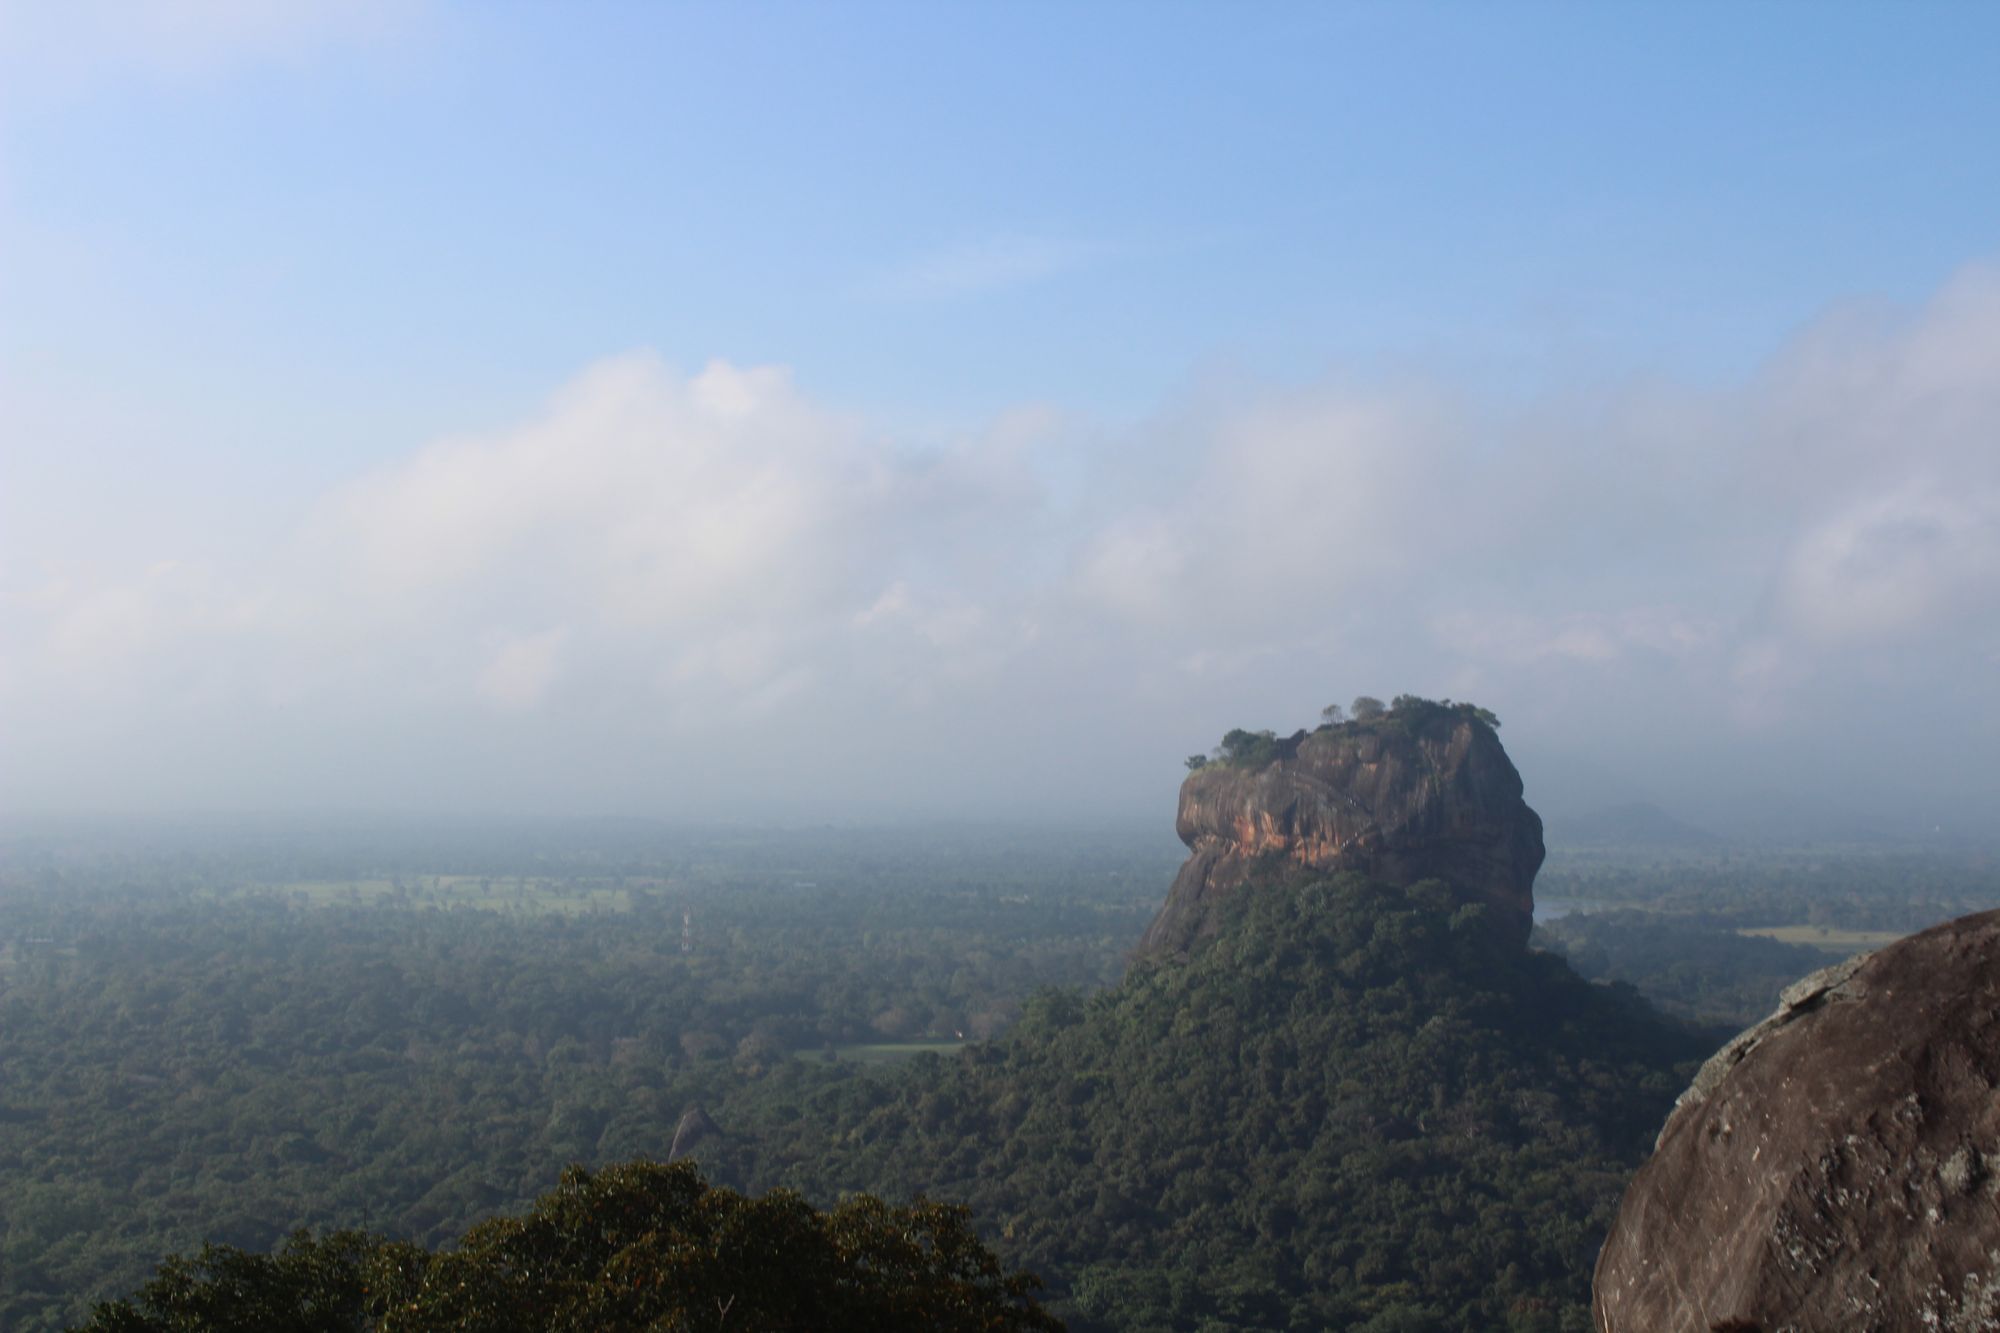 Sigiriya, the rock fortress in Sri Lanka, with the green plains of Dambulla in the background and a cloudy sky.